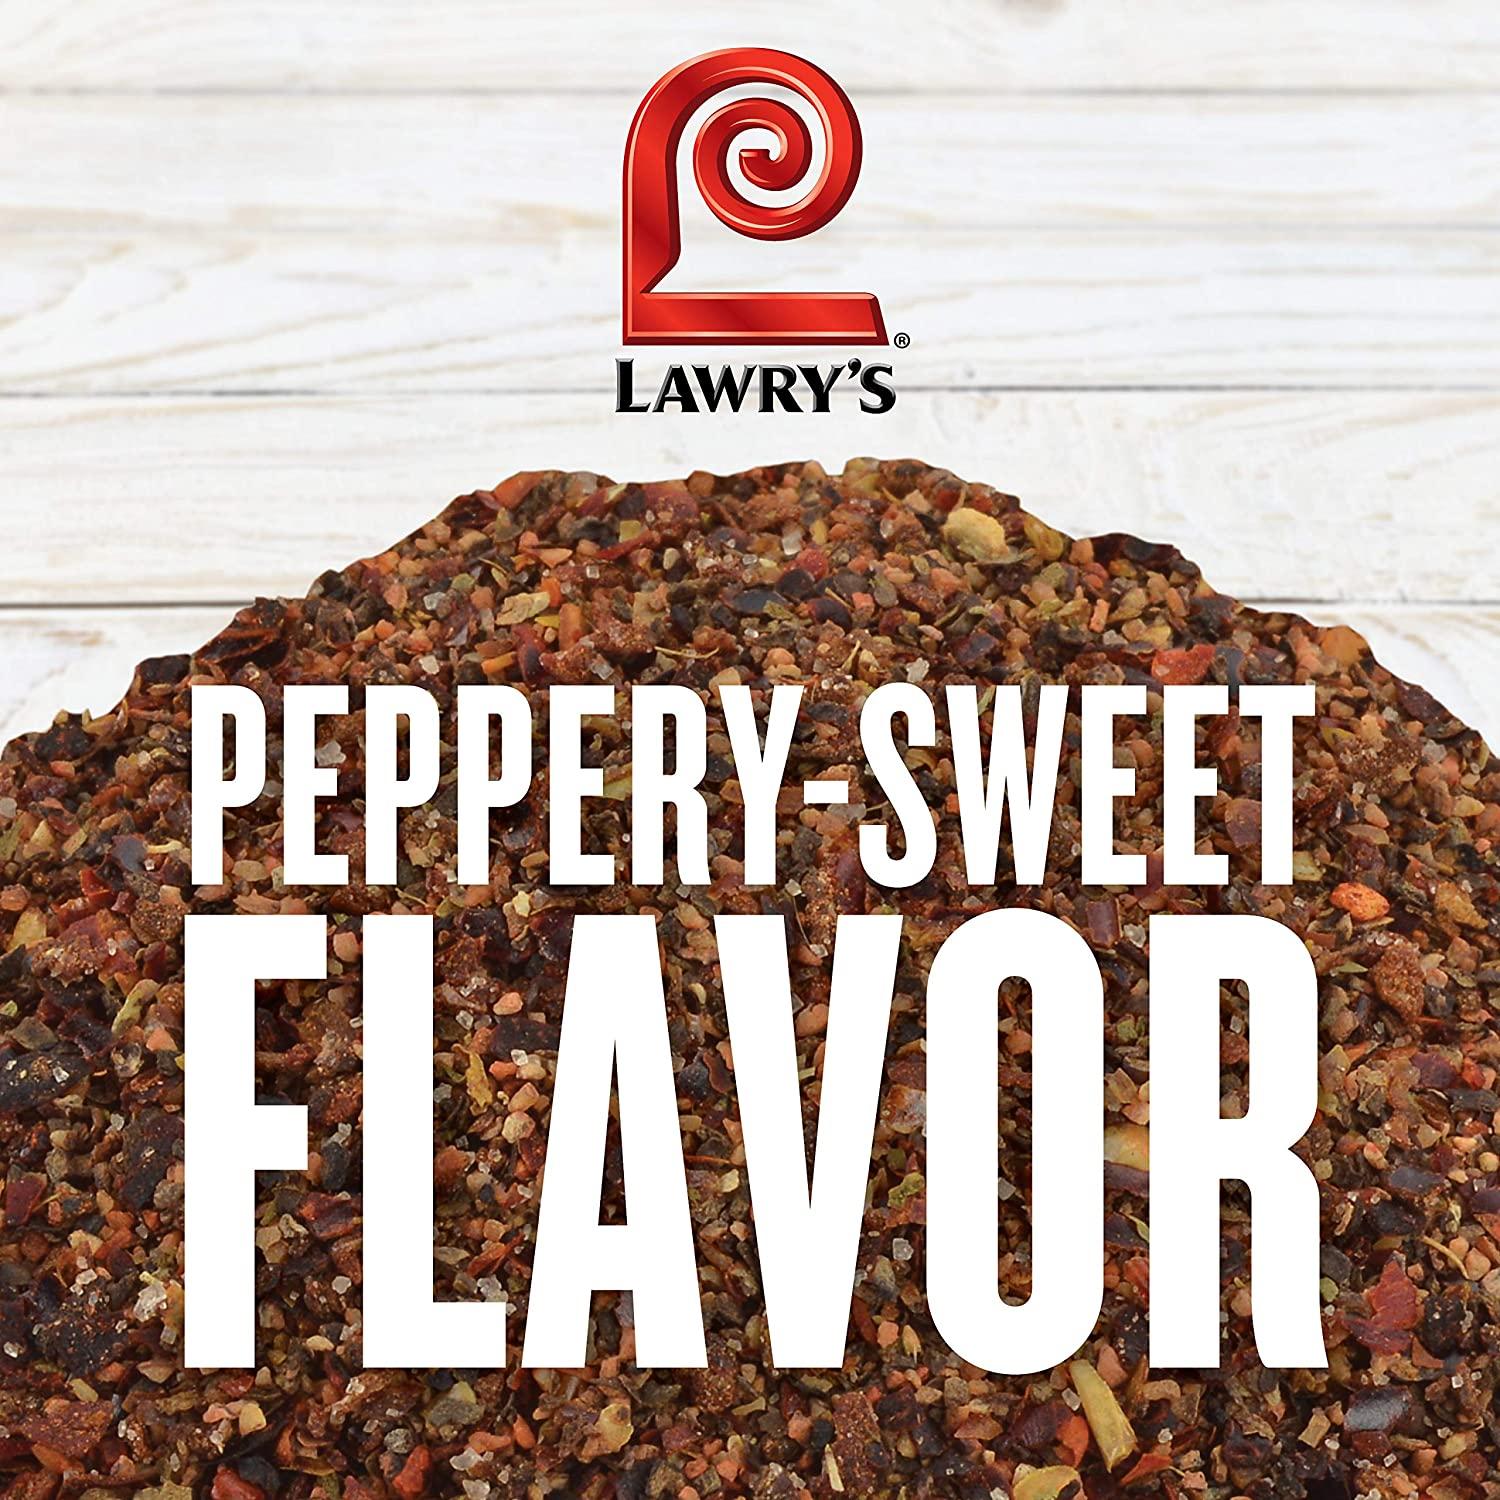 Lawry's Seasoned Pepper, 10.3 oz - One 10.3 Ounce Container of